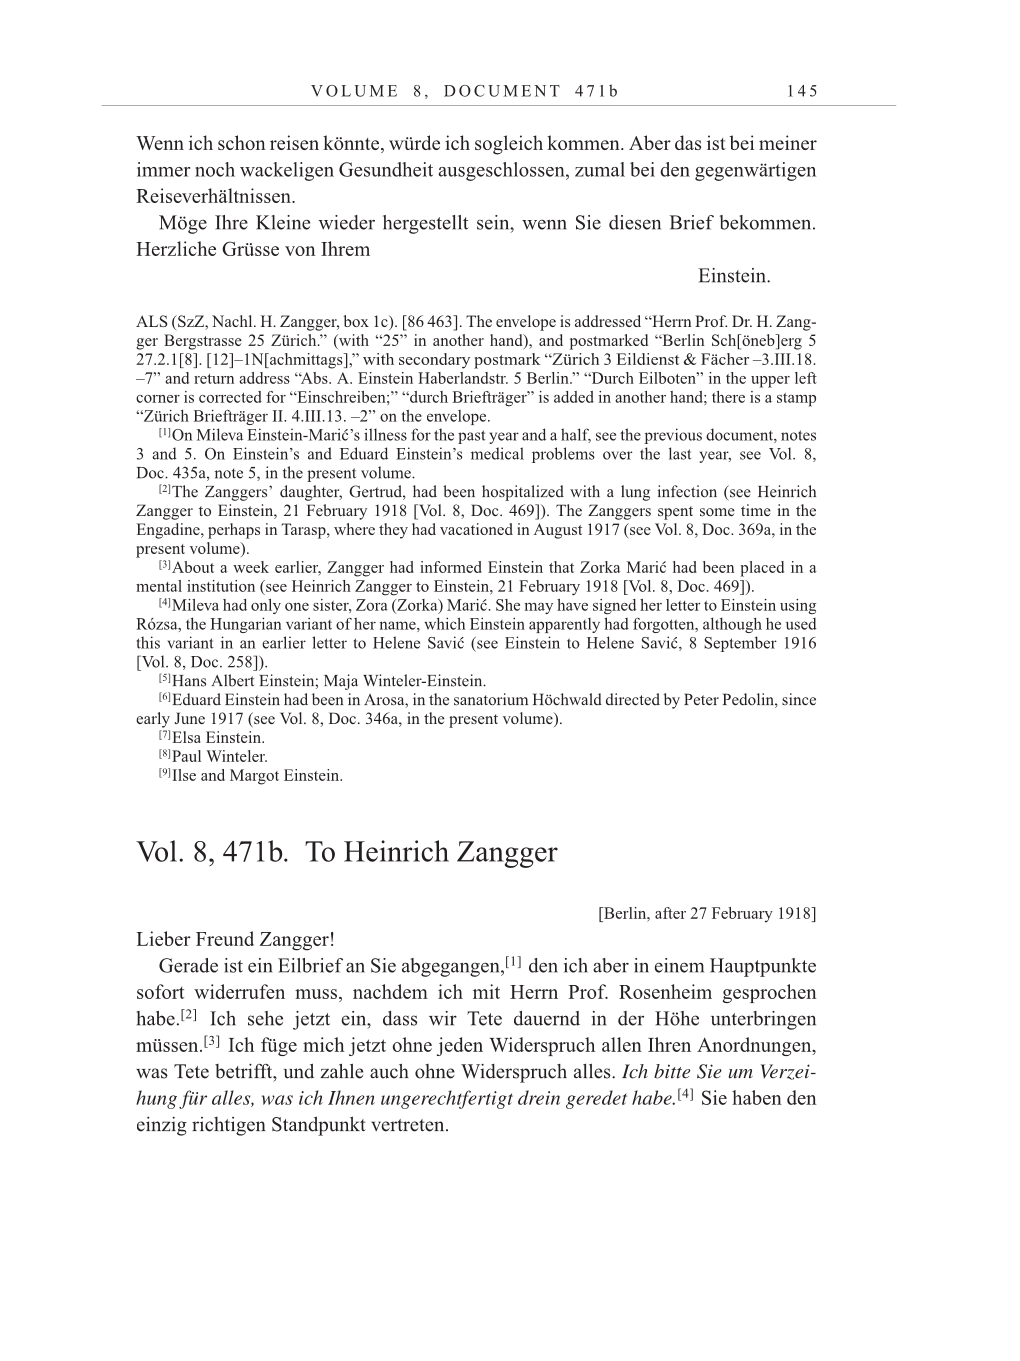 Volume 10: The Berlin Years: Correspondence May-December 1920 / Supplementary Correspondence 1909-1920 page 145